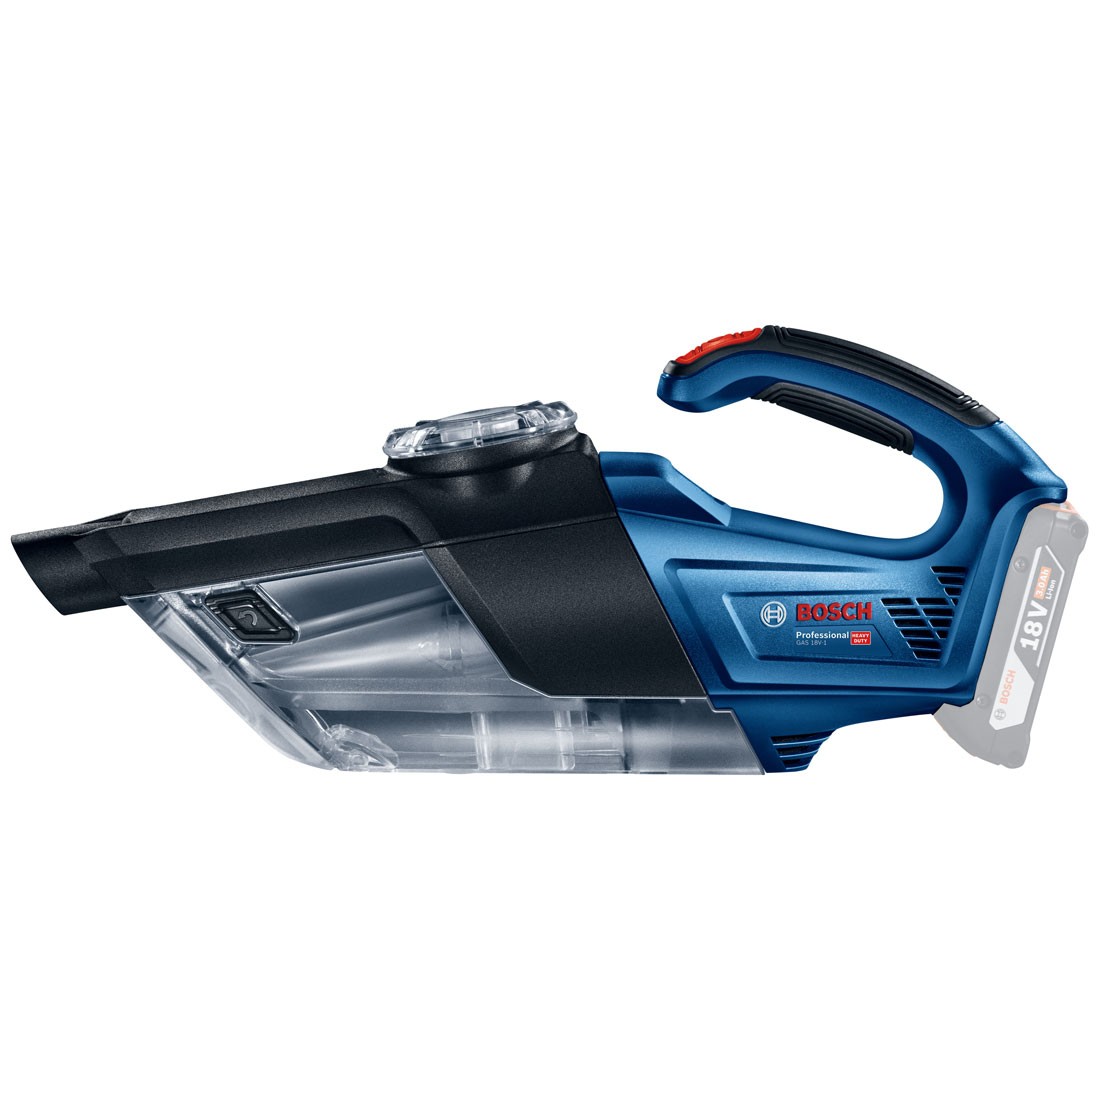 BOSCH GAS18V-1 CORDLESS VACUUM CLEANER (SOLO)